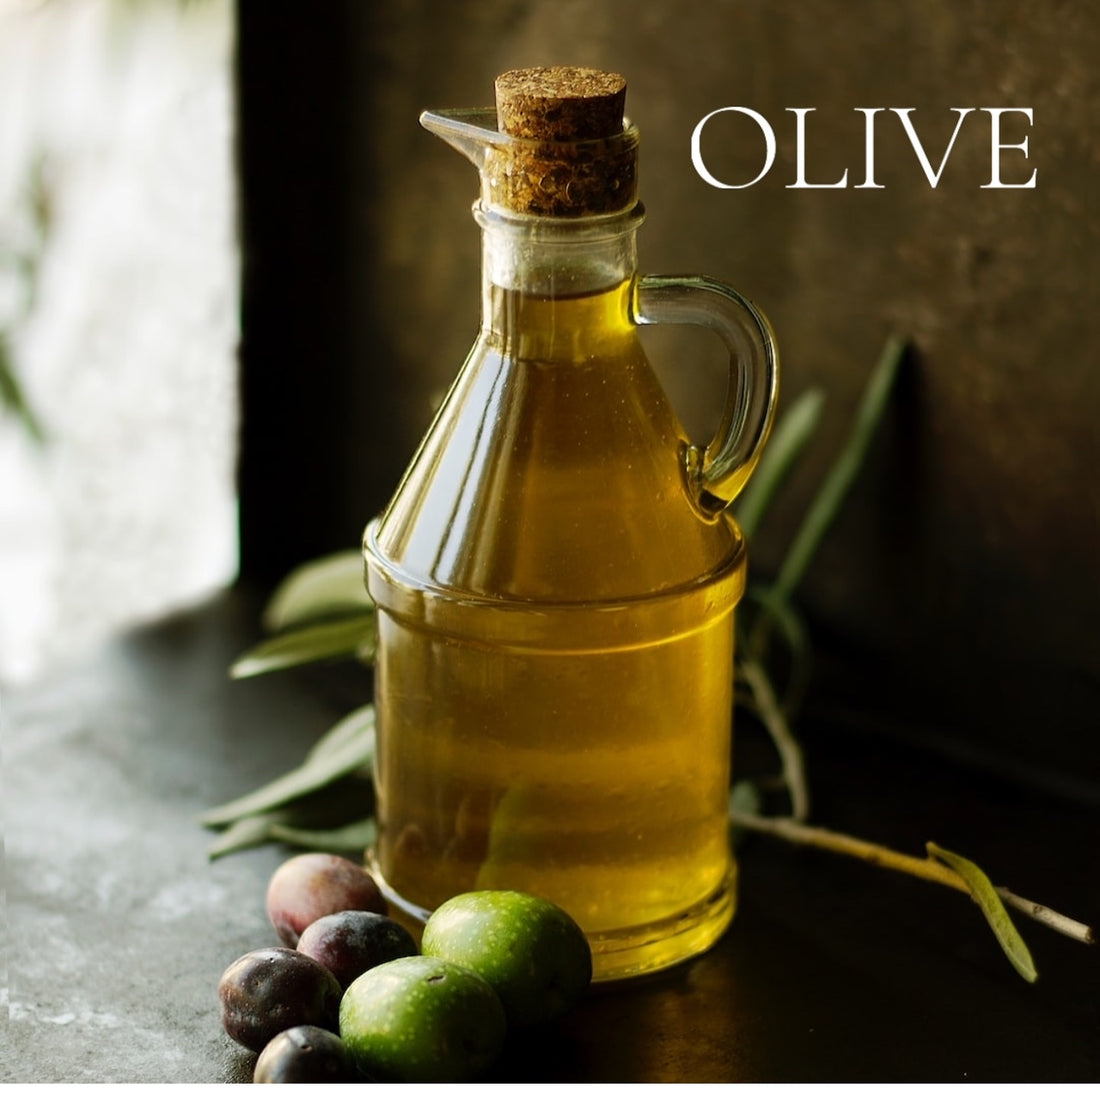 OLIVE - Room and Body Spray, Buy 2 get 1  FREE